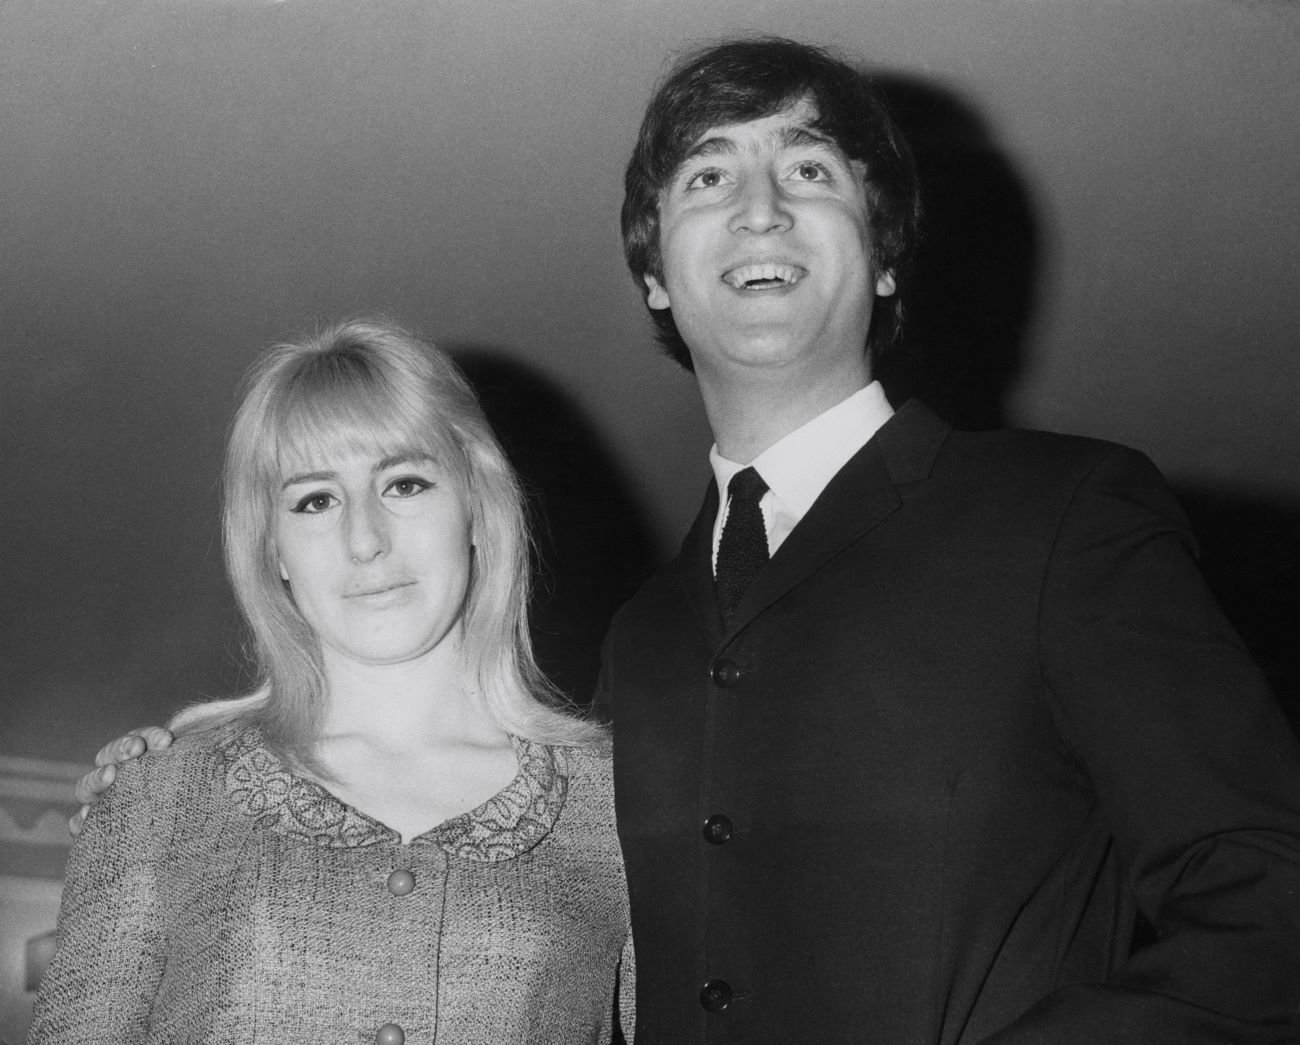 A black and white picture of John Lennon standing with his arm around Cynthia Lennon's shoulders.